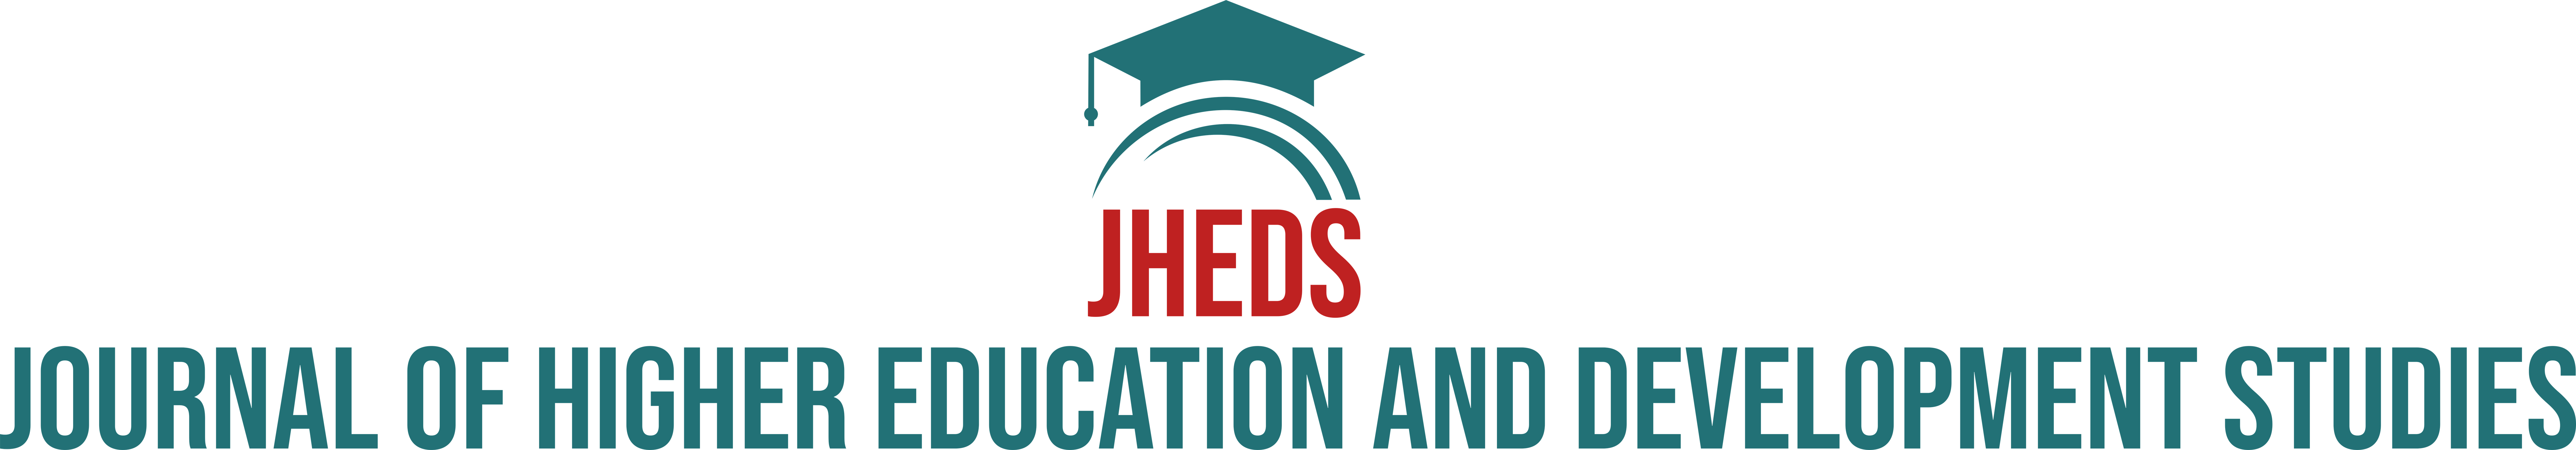 Journal of Higher Education and Development Studies (JHEDS)